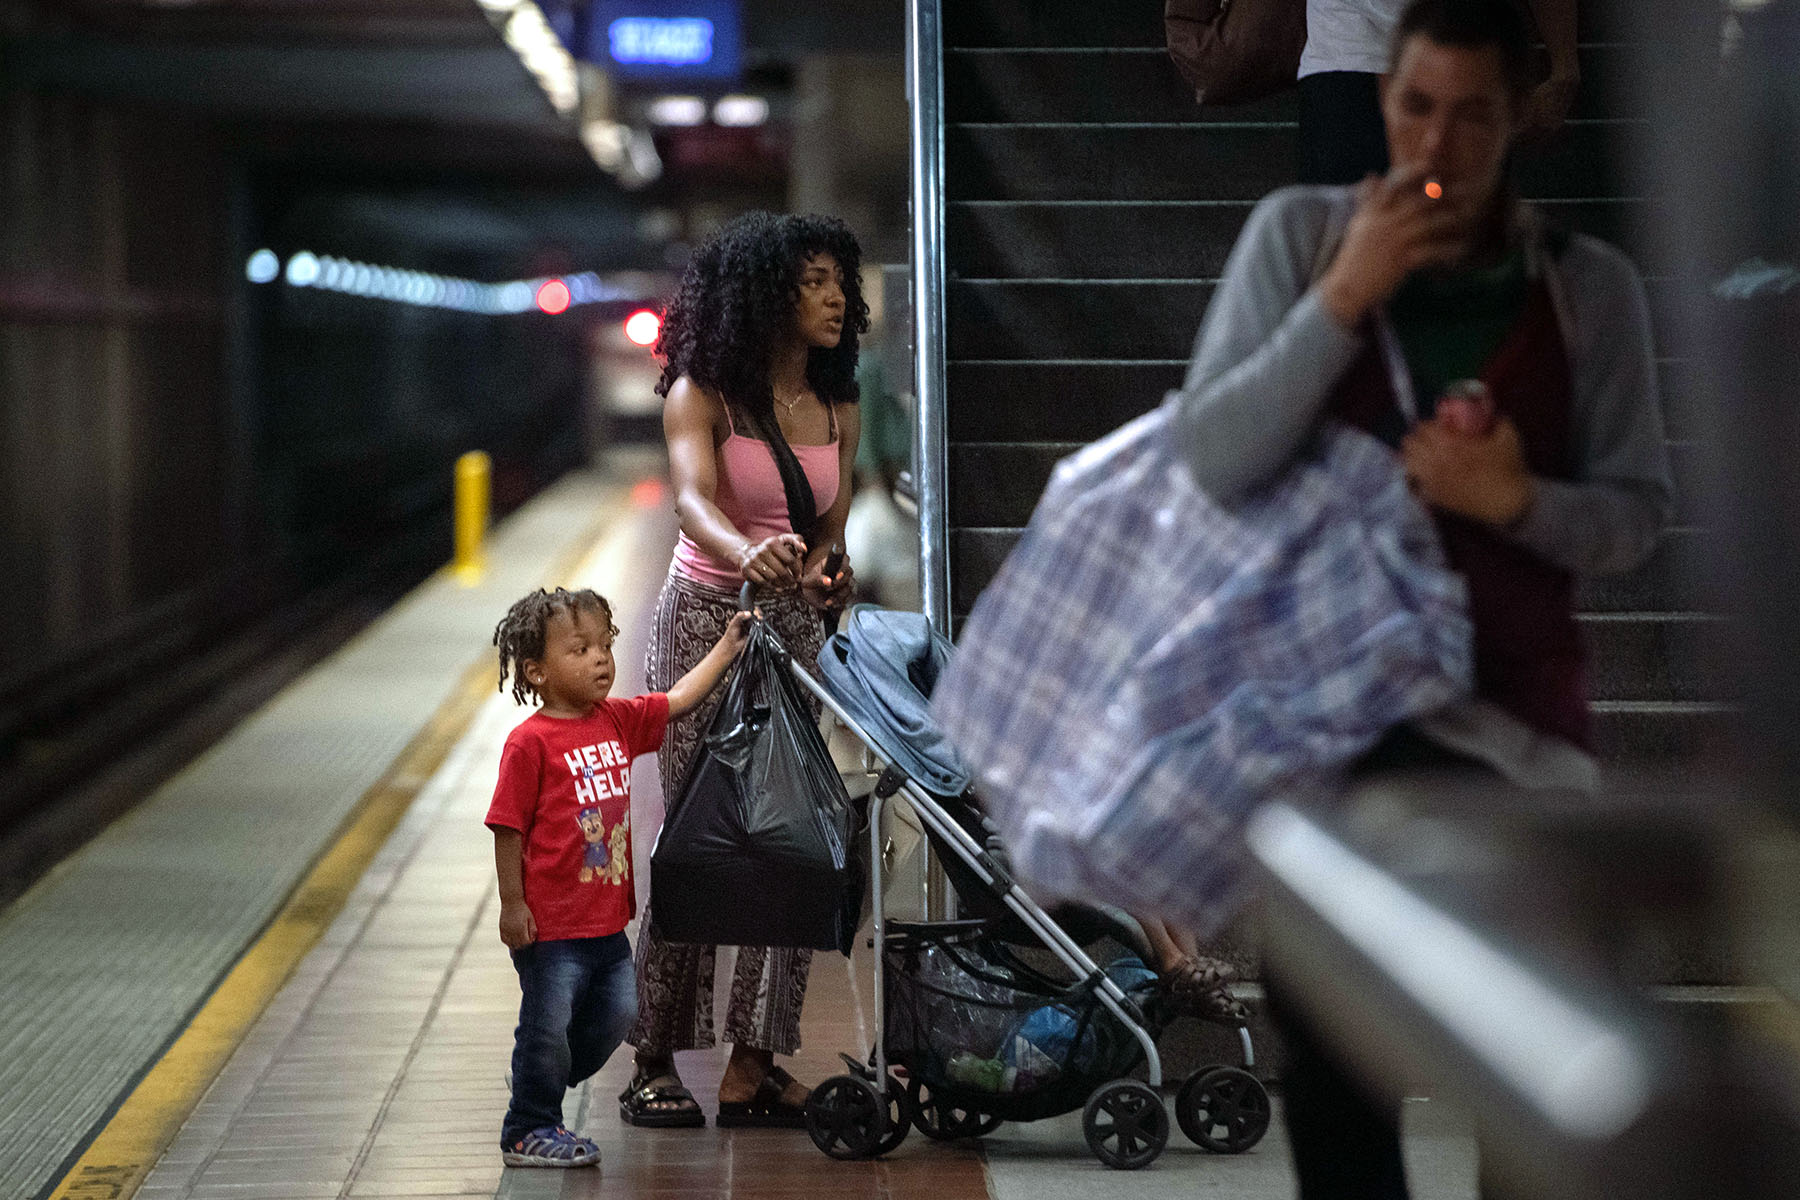 A mother of two young children is seen on a platform of the Los Angeles metro.